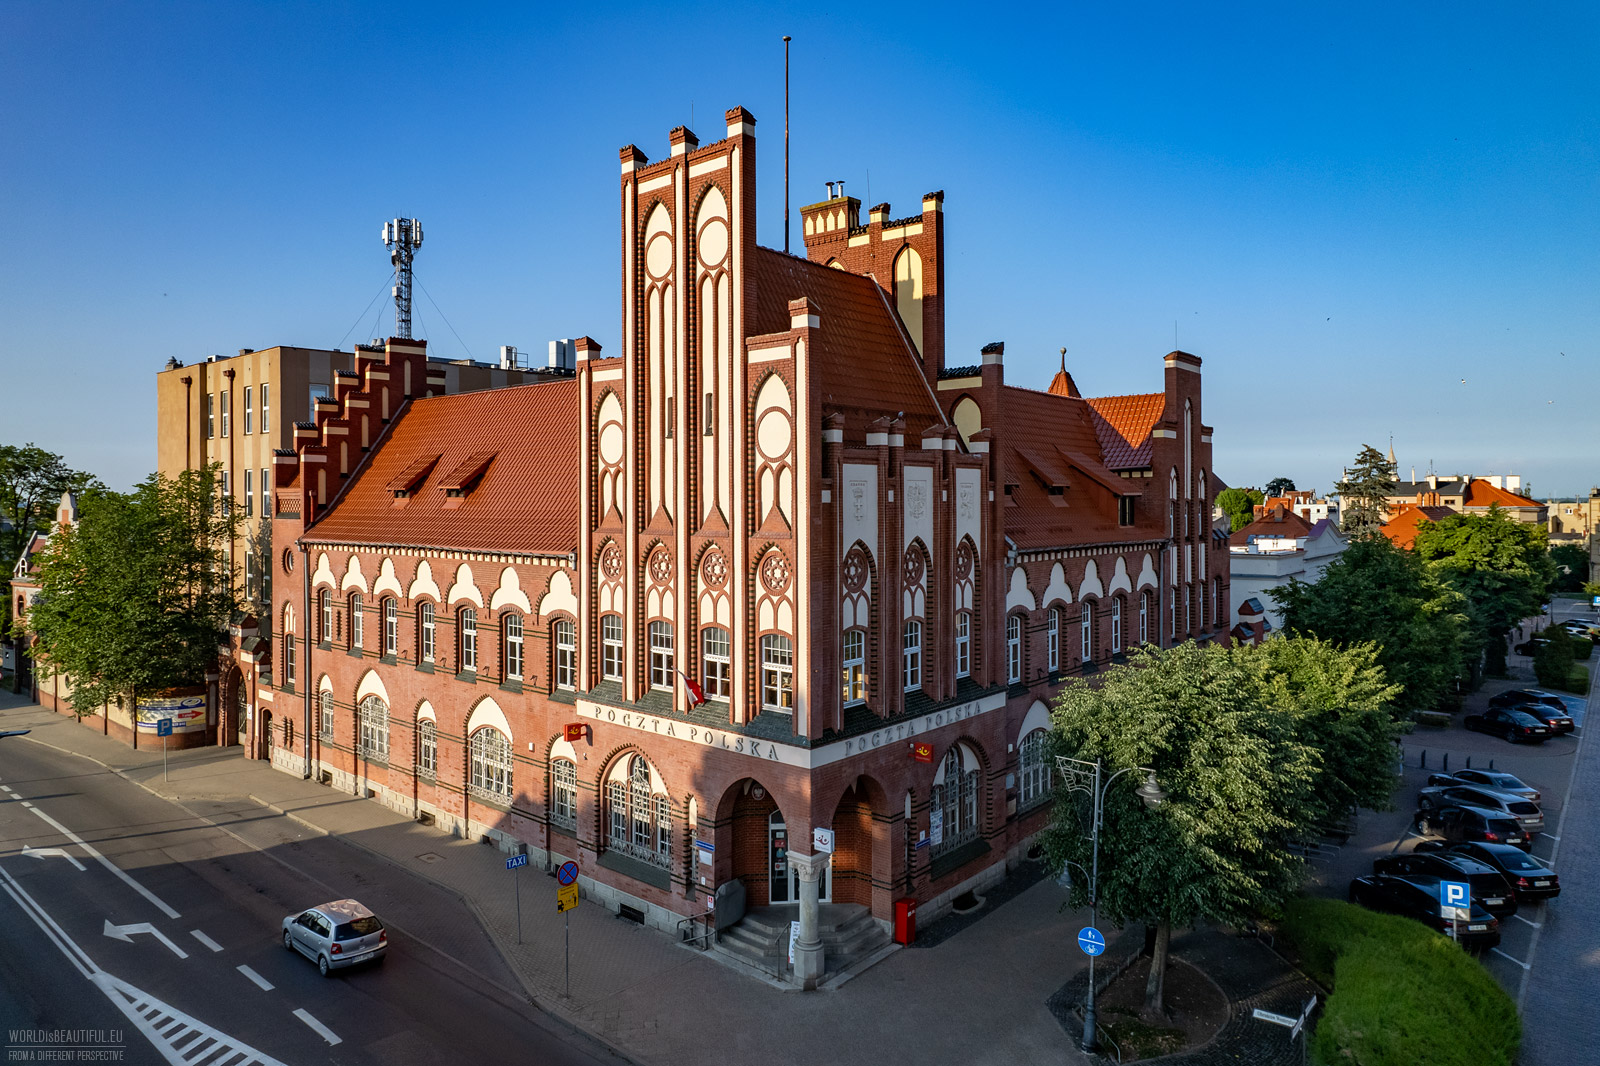 Polish Post Office in Tczew